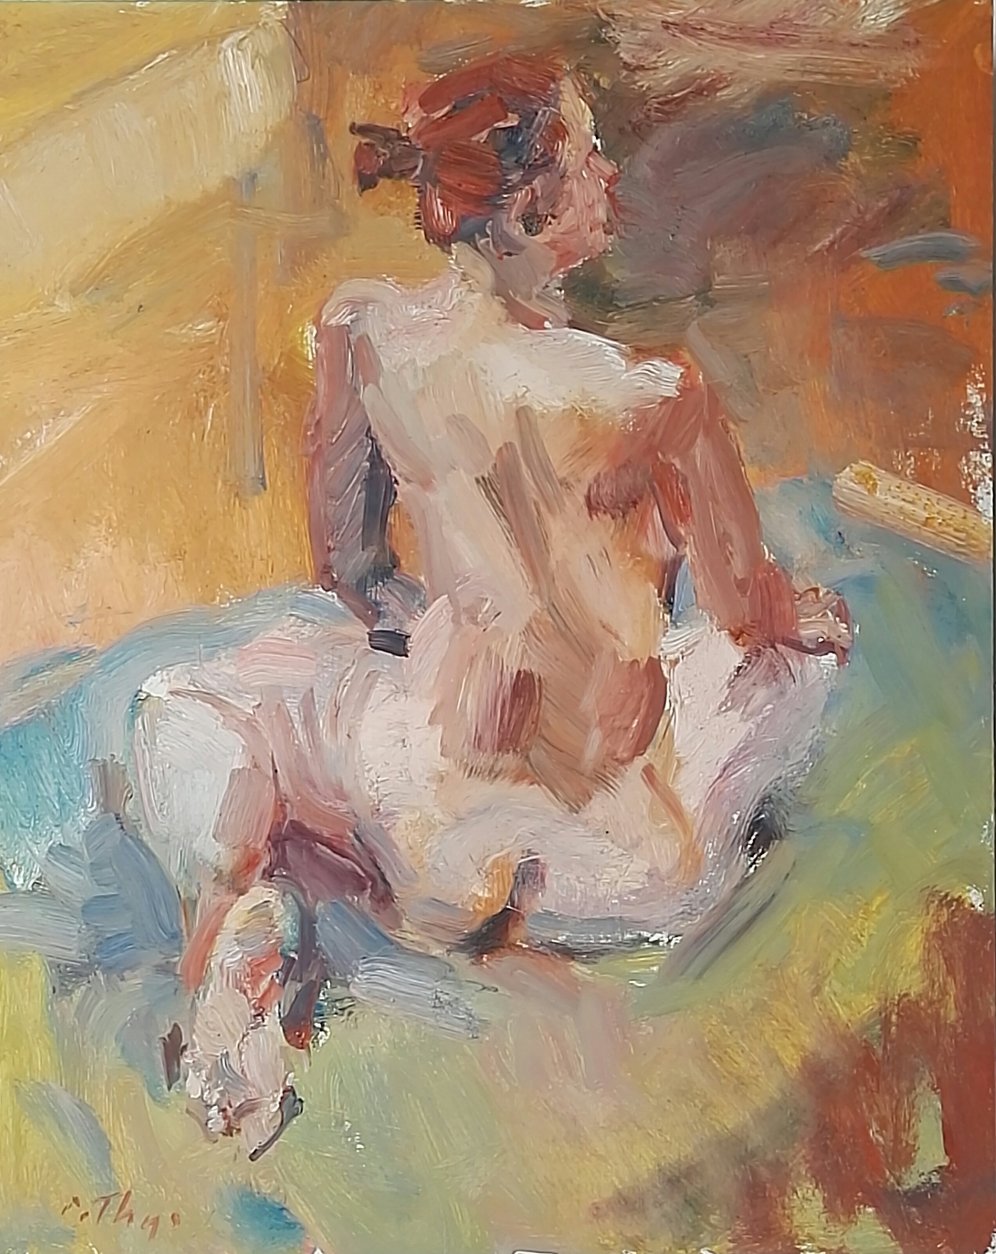 ‘Ground seated figure’ 2015 oil on board 61x50cm